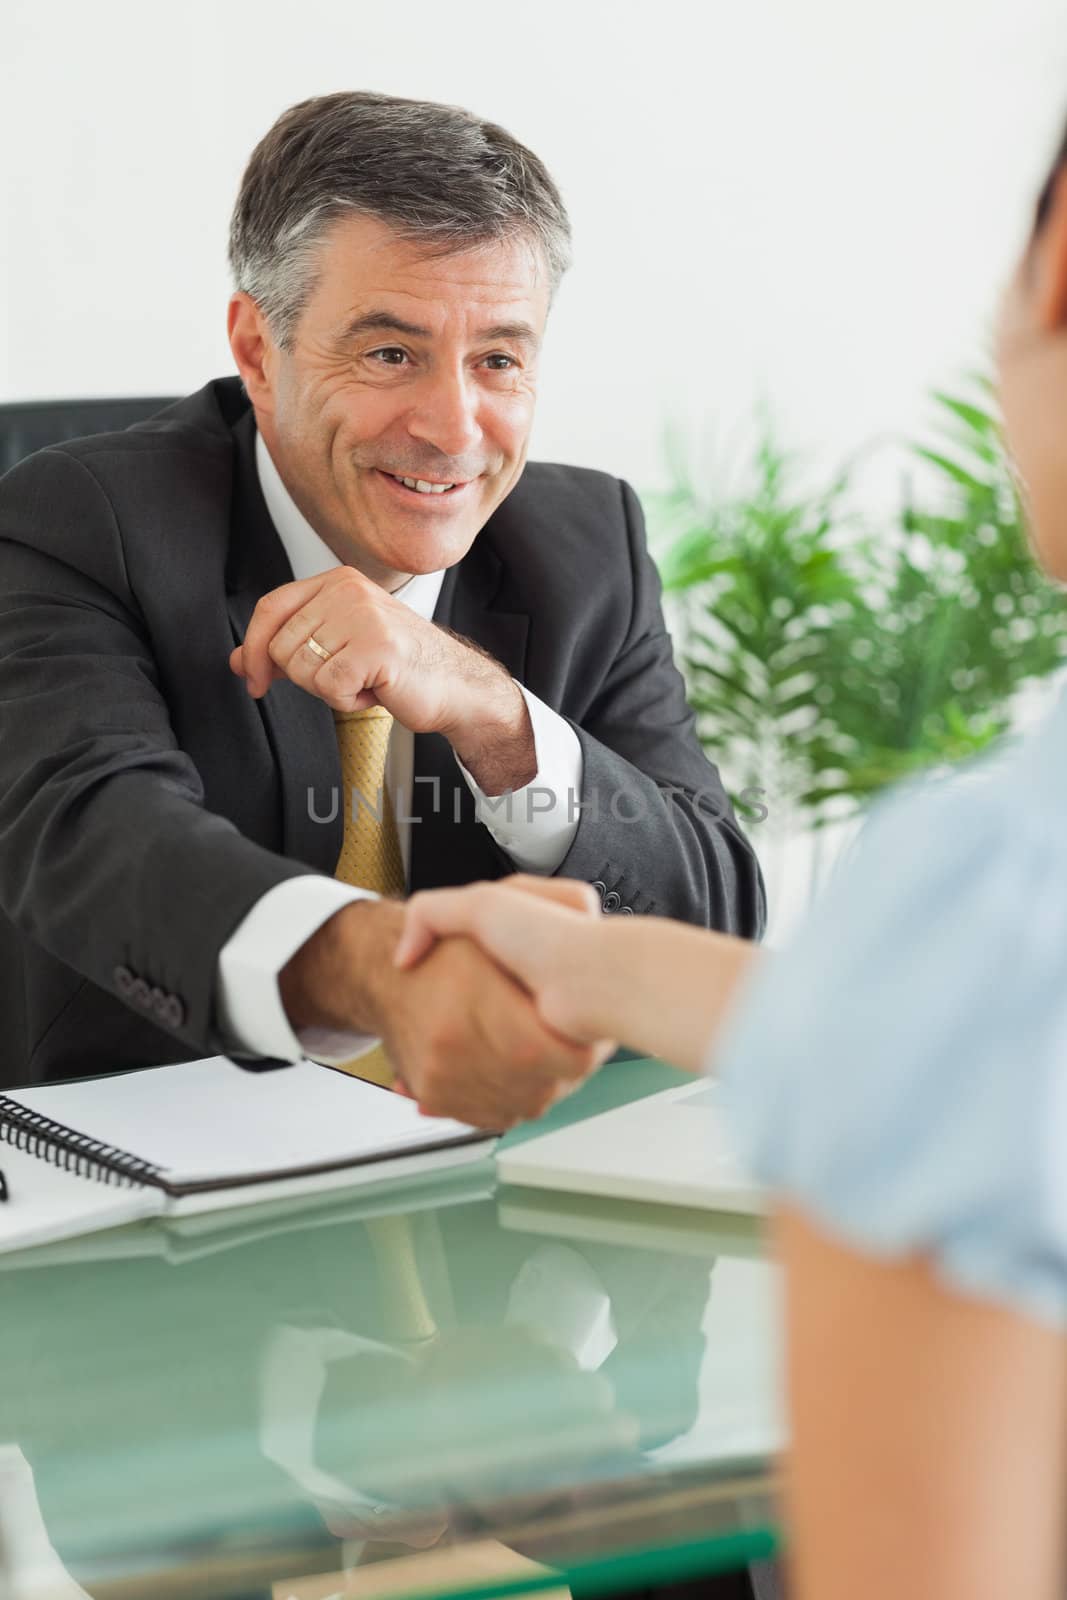 Smily businessman shaking a woman's hand in his office 